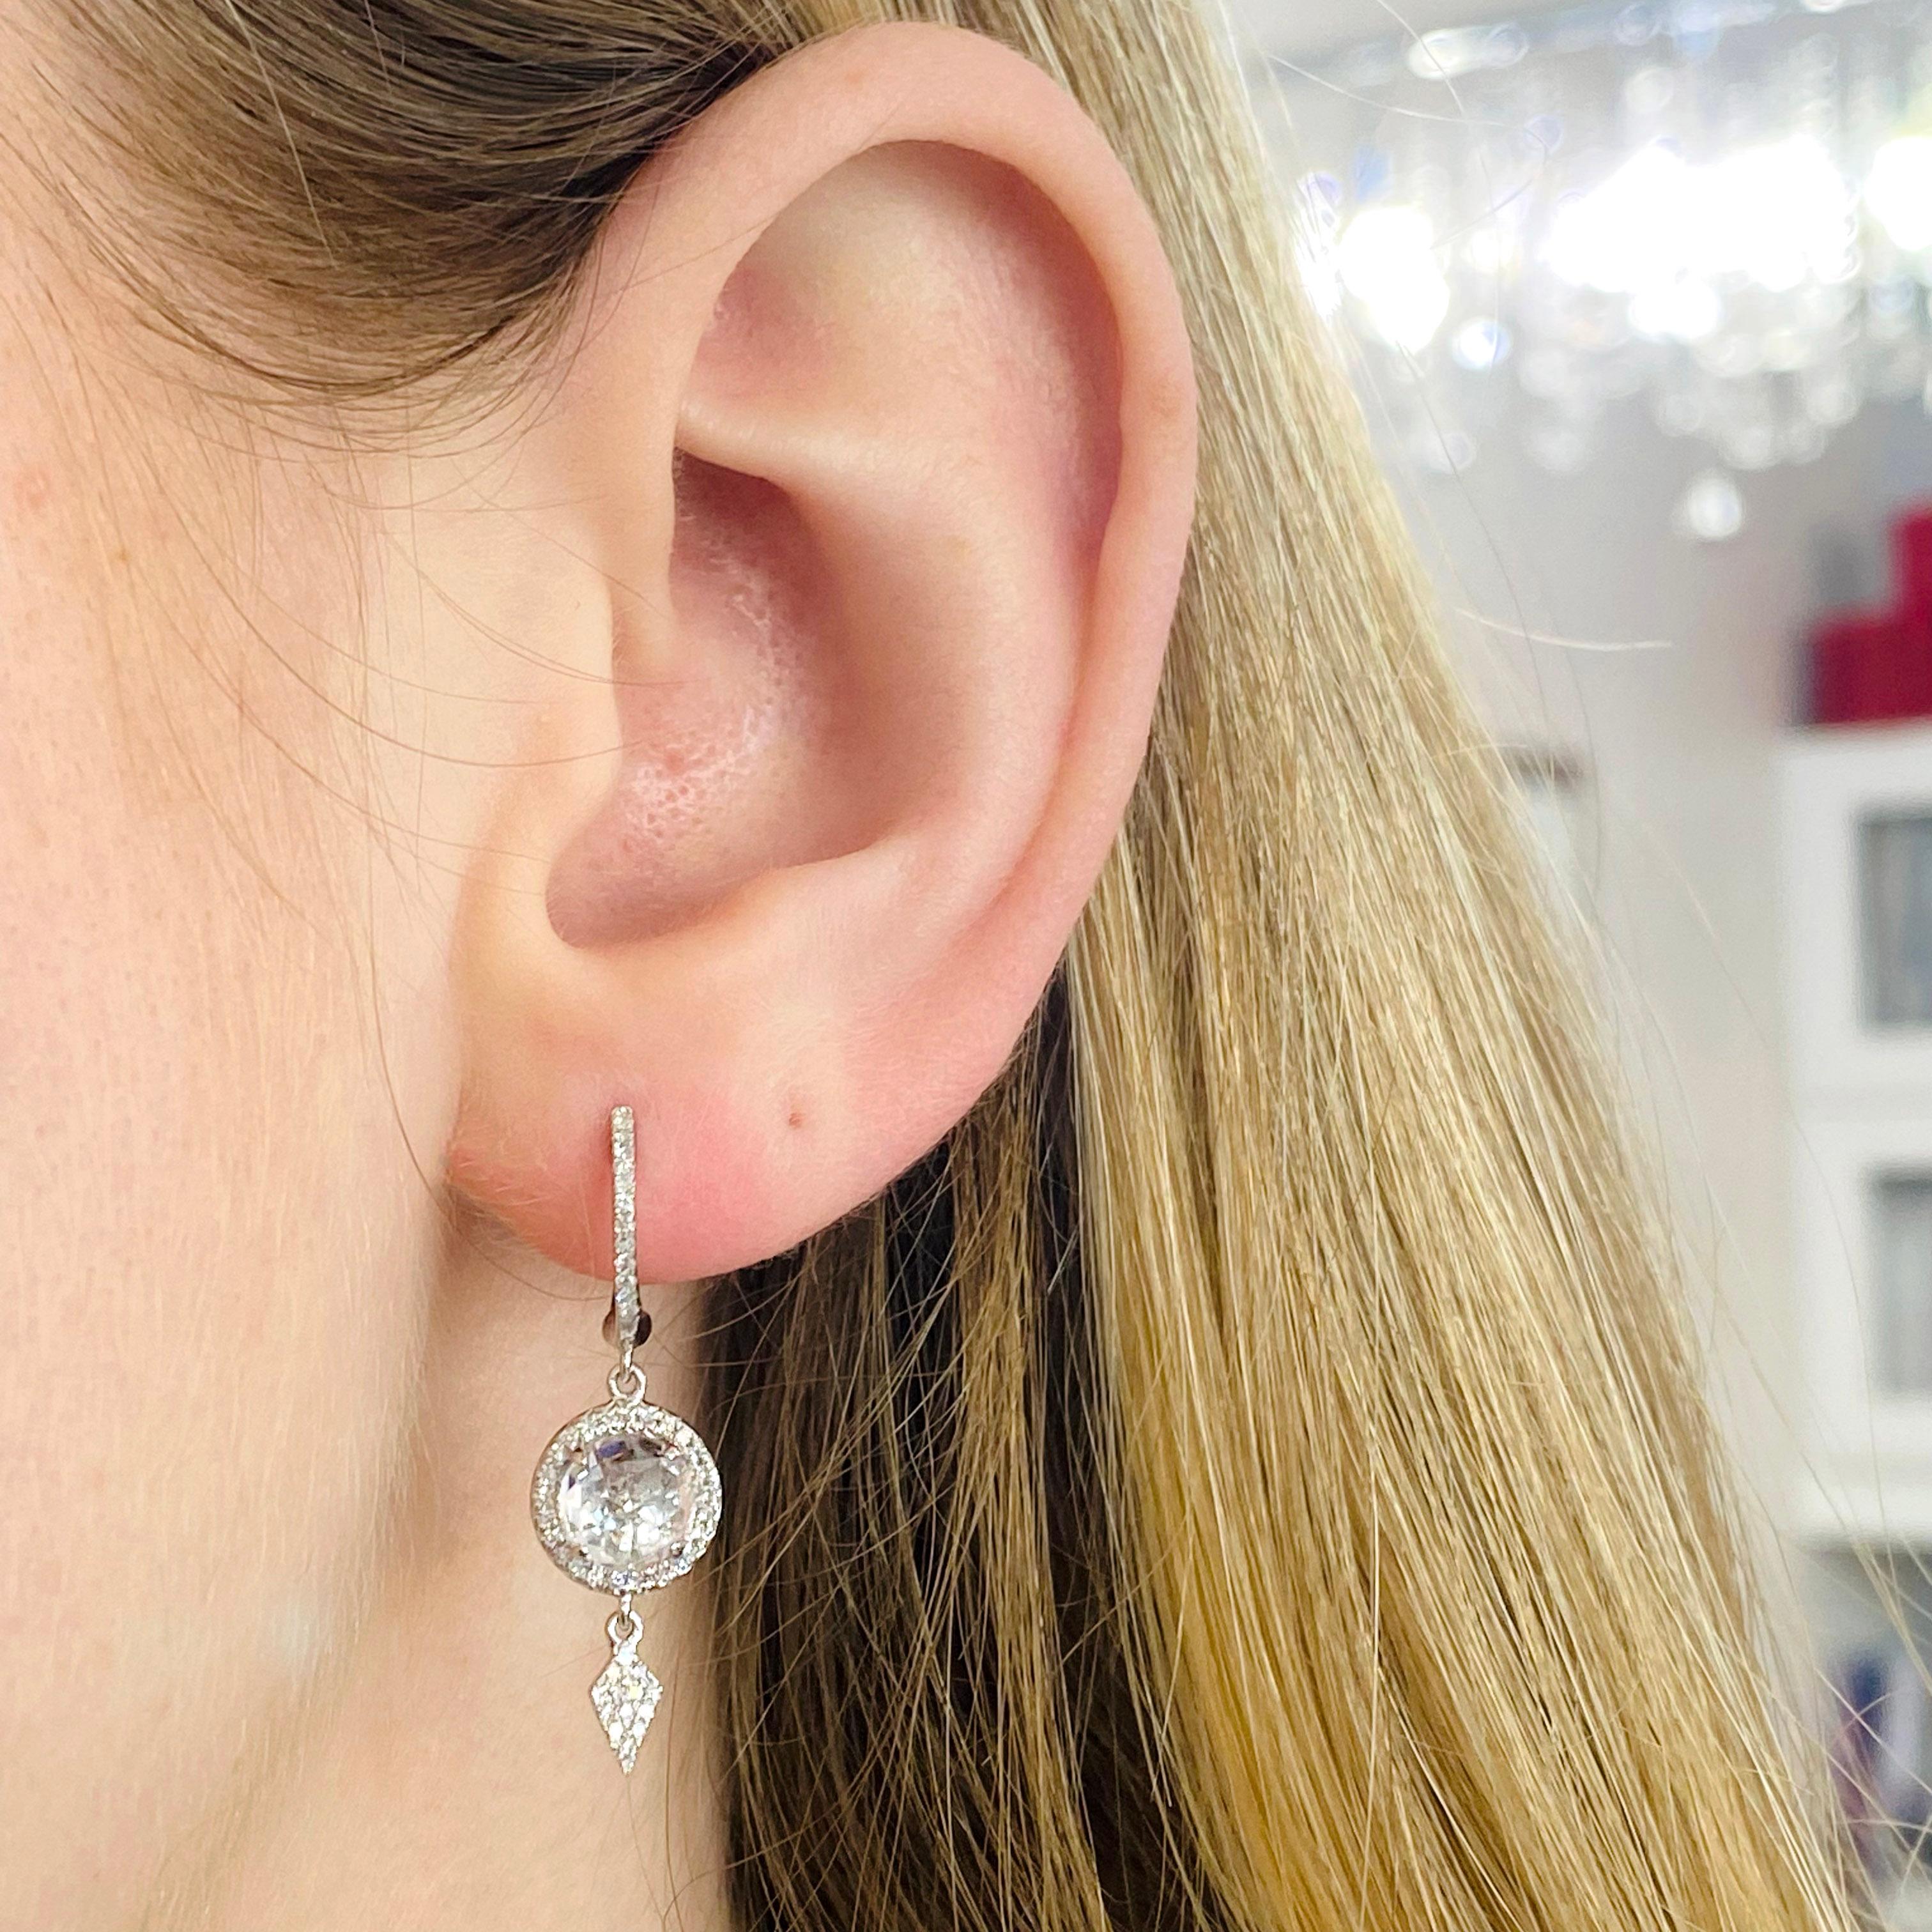 These diamond dangle earrings are super versatile, from jeans to dressy or even for your wedding earrings!  Each earring is made in 3 parts so it has movement as your head and body move. This glorious feature makes it our number one diamond earrings